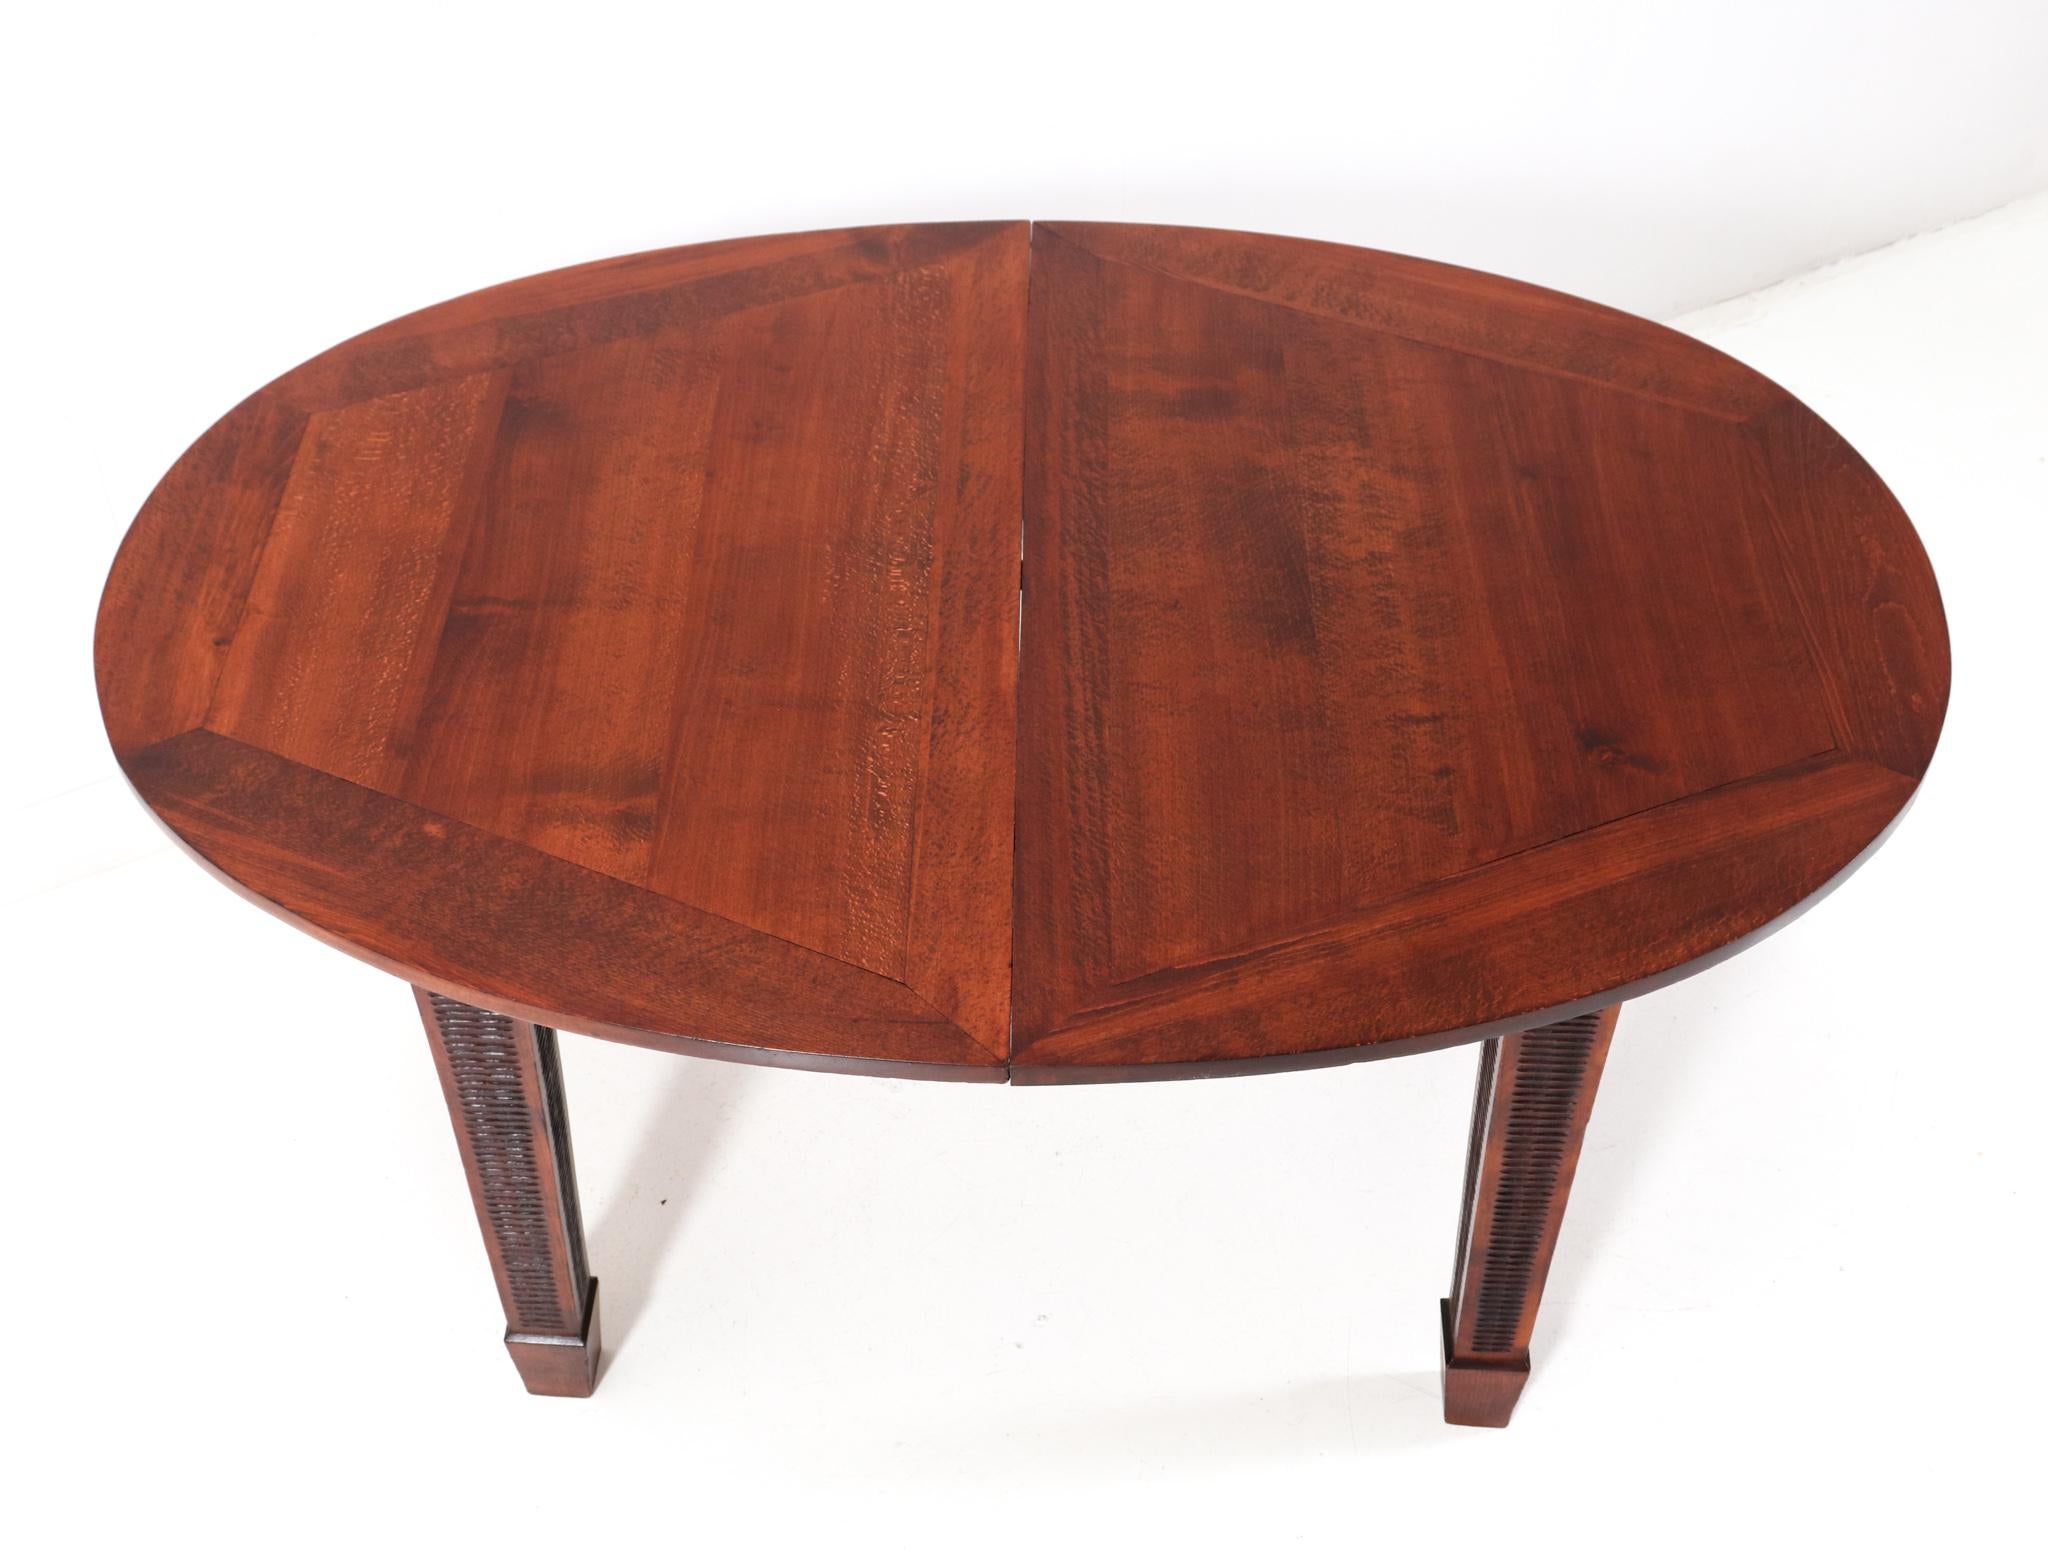 Early 20th Century Art Deco Amsterdamse School Extending Dining Room Table, 1920s